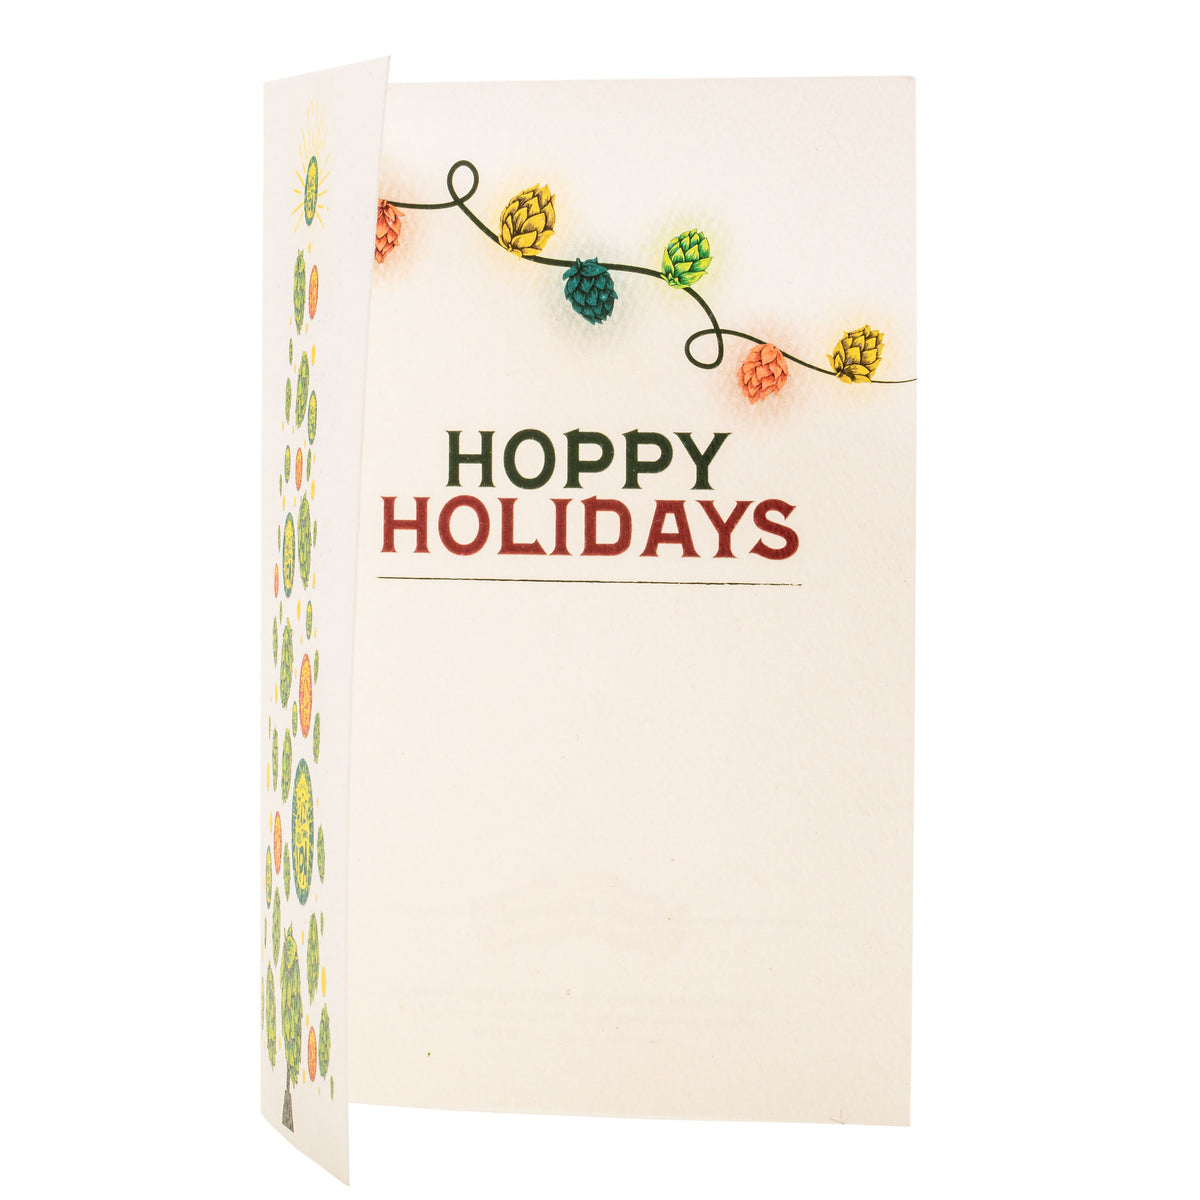 Holiday Greeting Card with Hoppy Holidays message